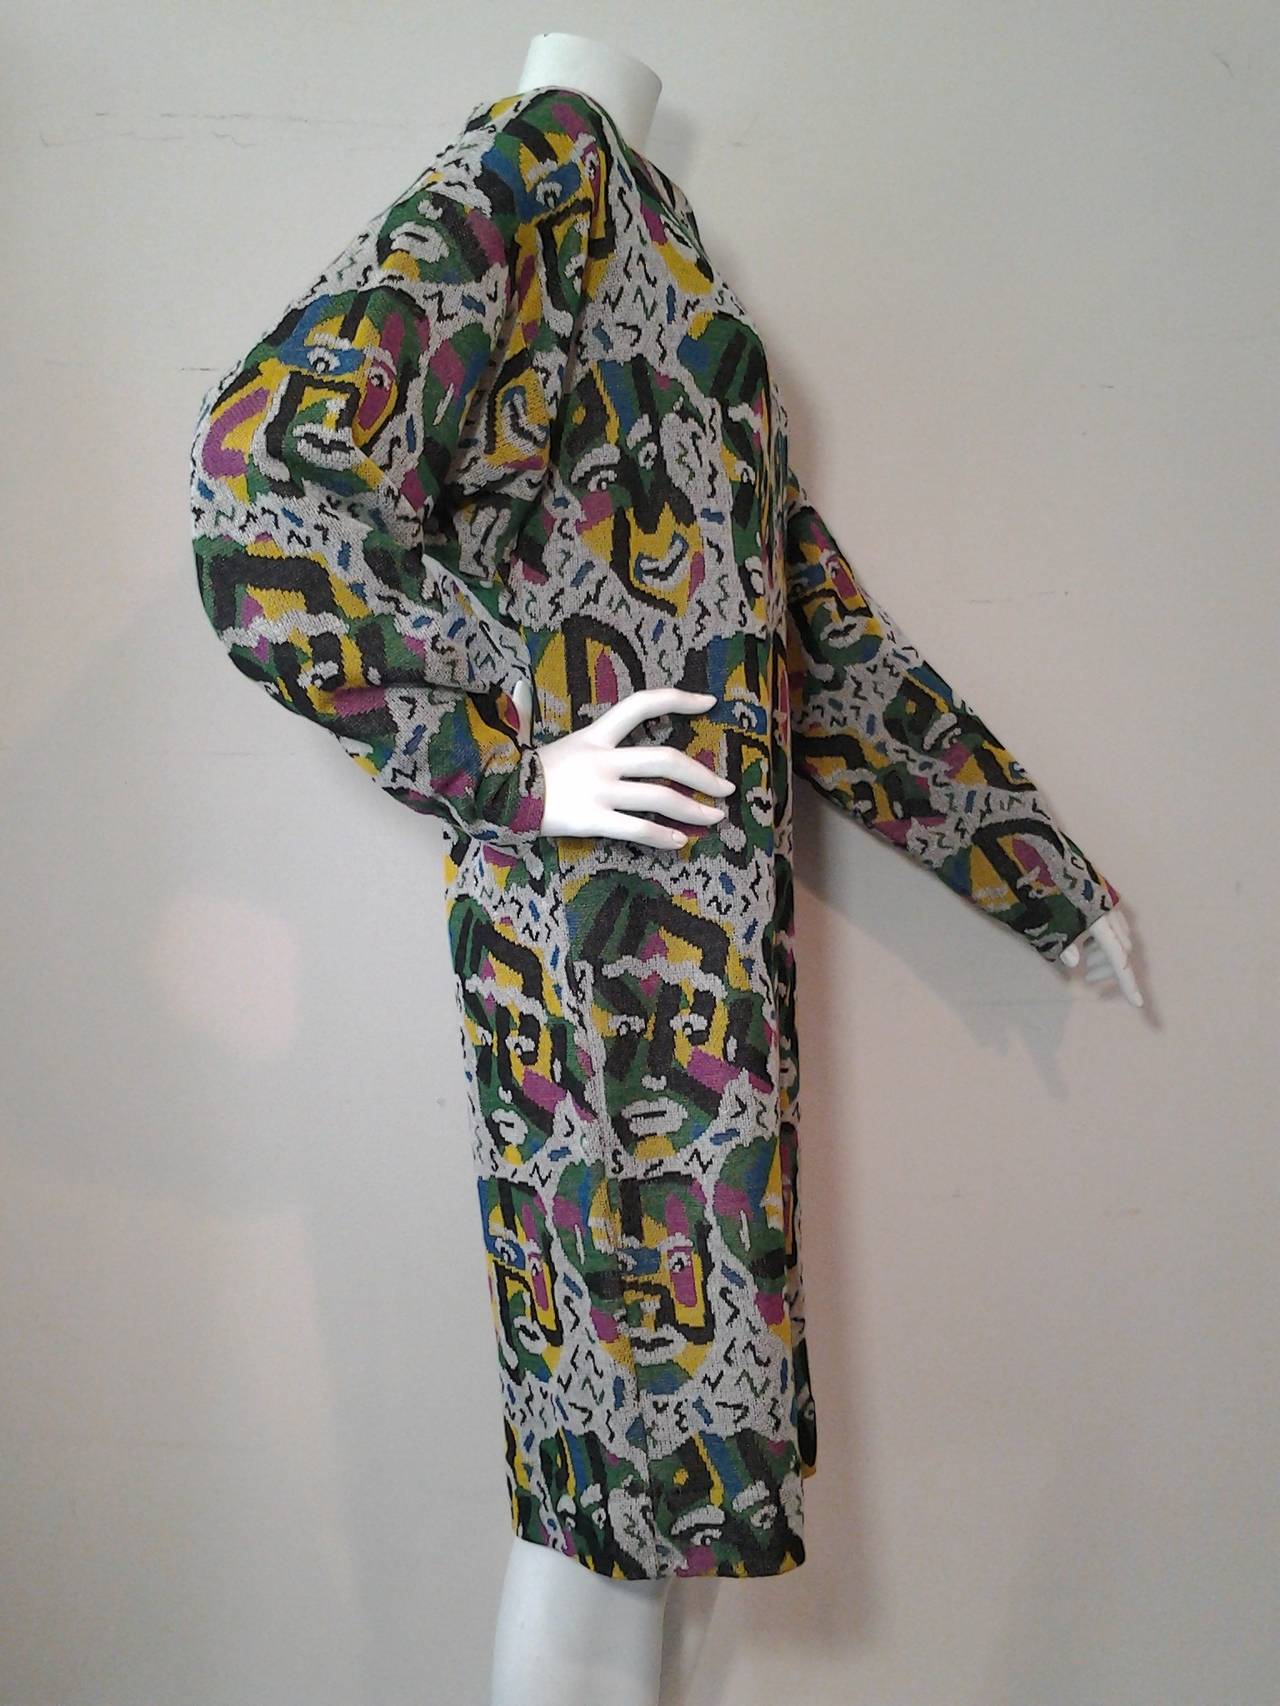 A fabulous knee-length 1980s Missoni lightweight knit sweater dress or tunic with abstract face or mask pattern woven in.